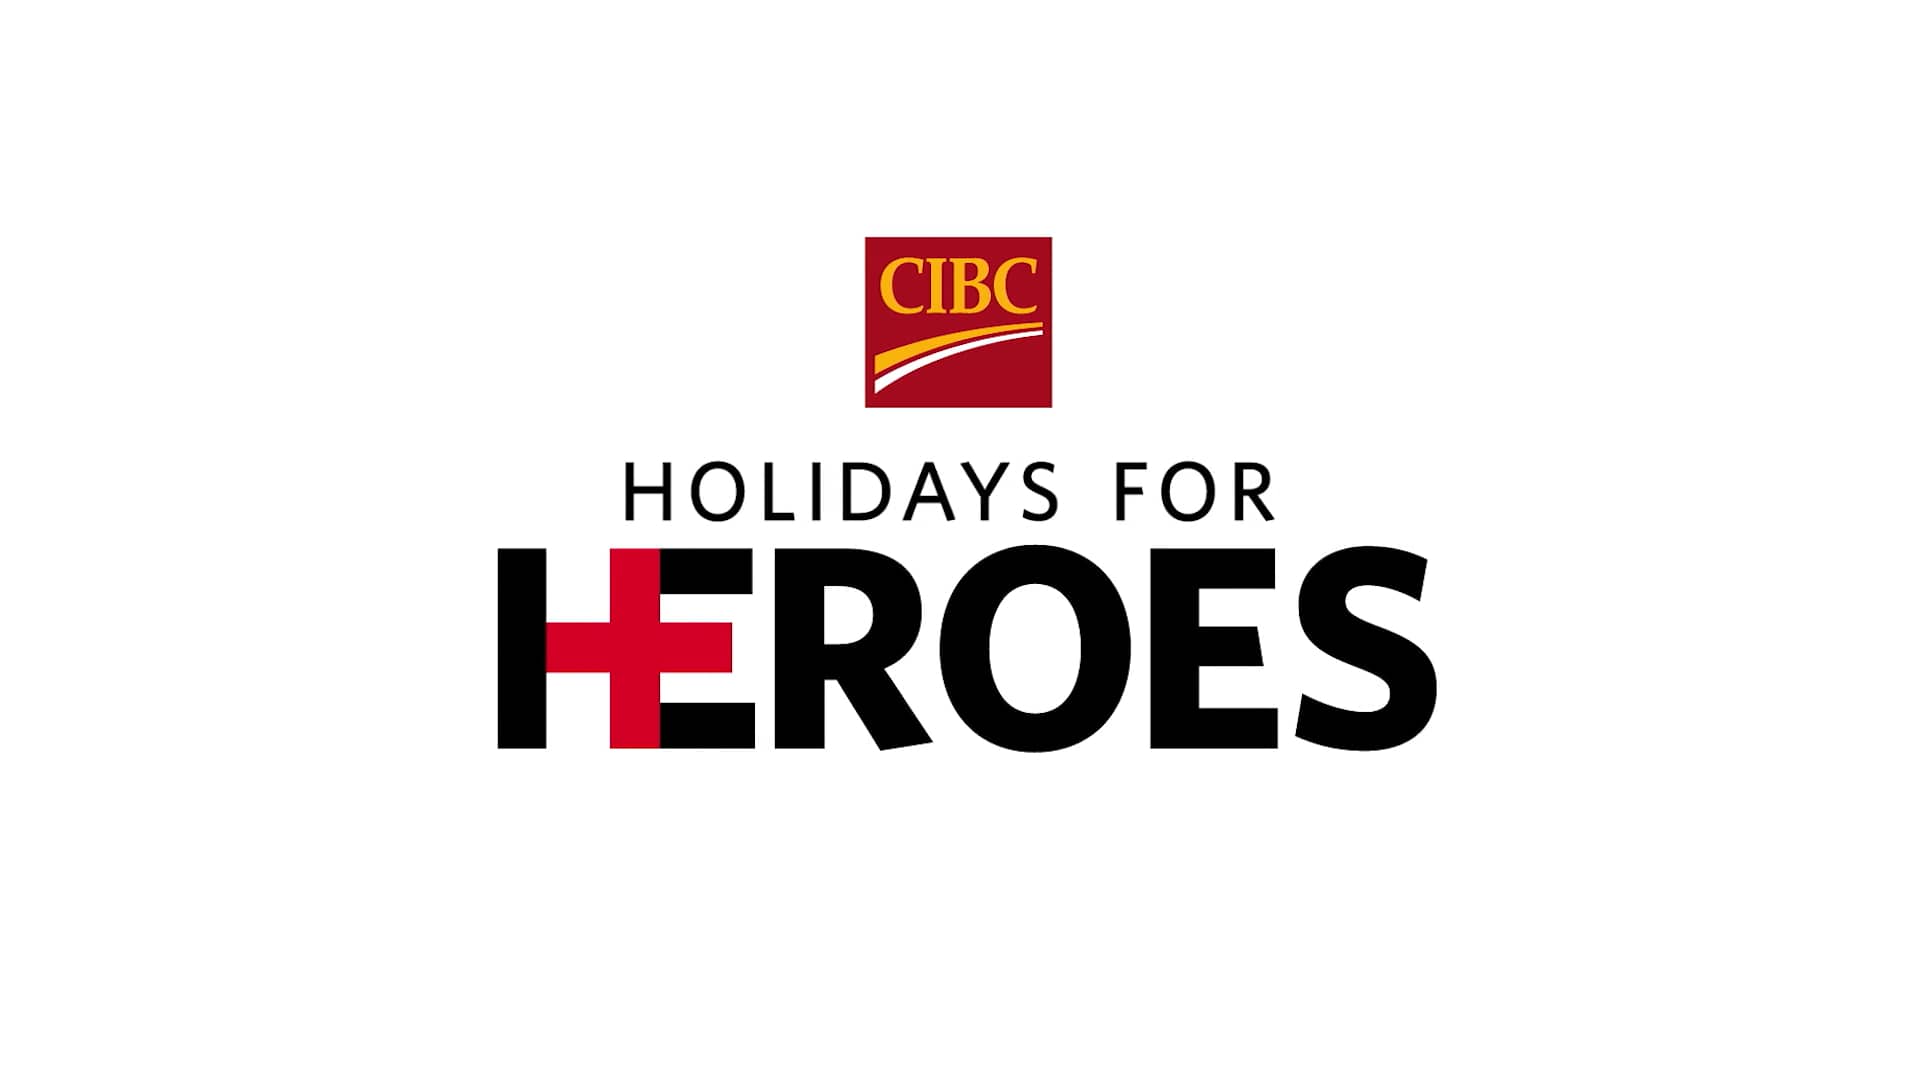 CIBC Holiday For Heroes on Vimeo